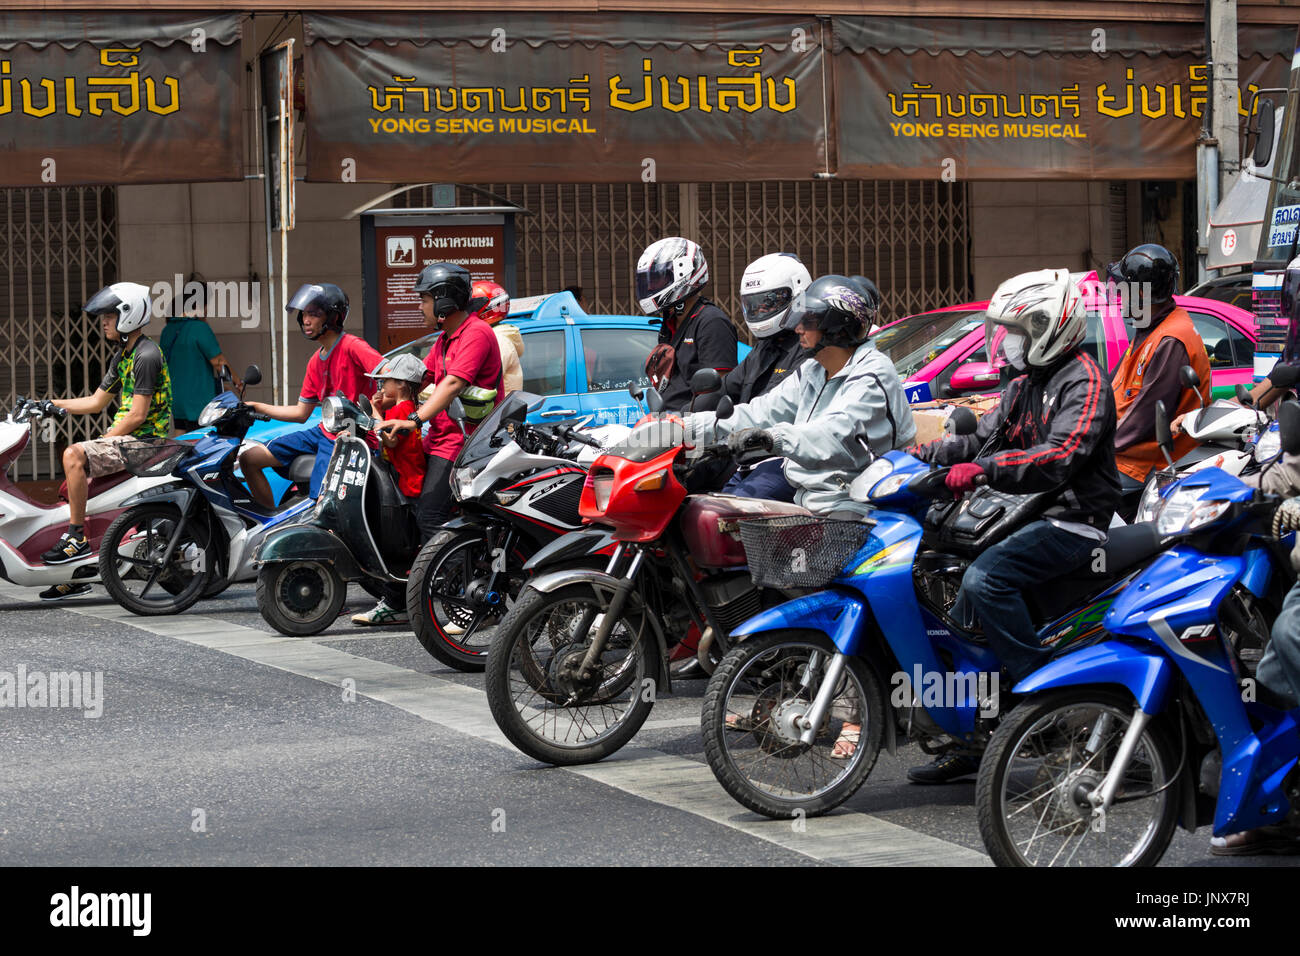 Bangkok, Thailand - February 18, 2015: Line of motorcycles waiting for a light to change in Bangkok. Motorcycles are a very common mode of transport in Bangkok. Stock Photo